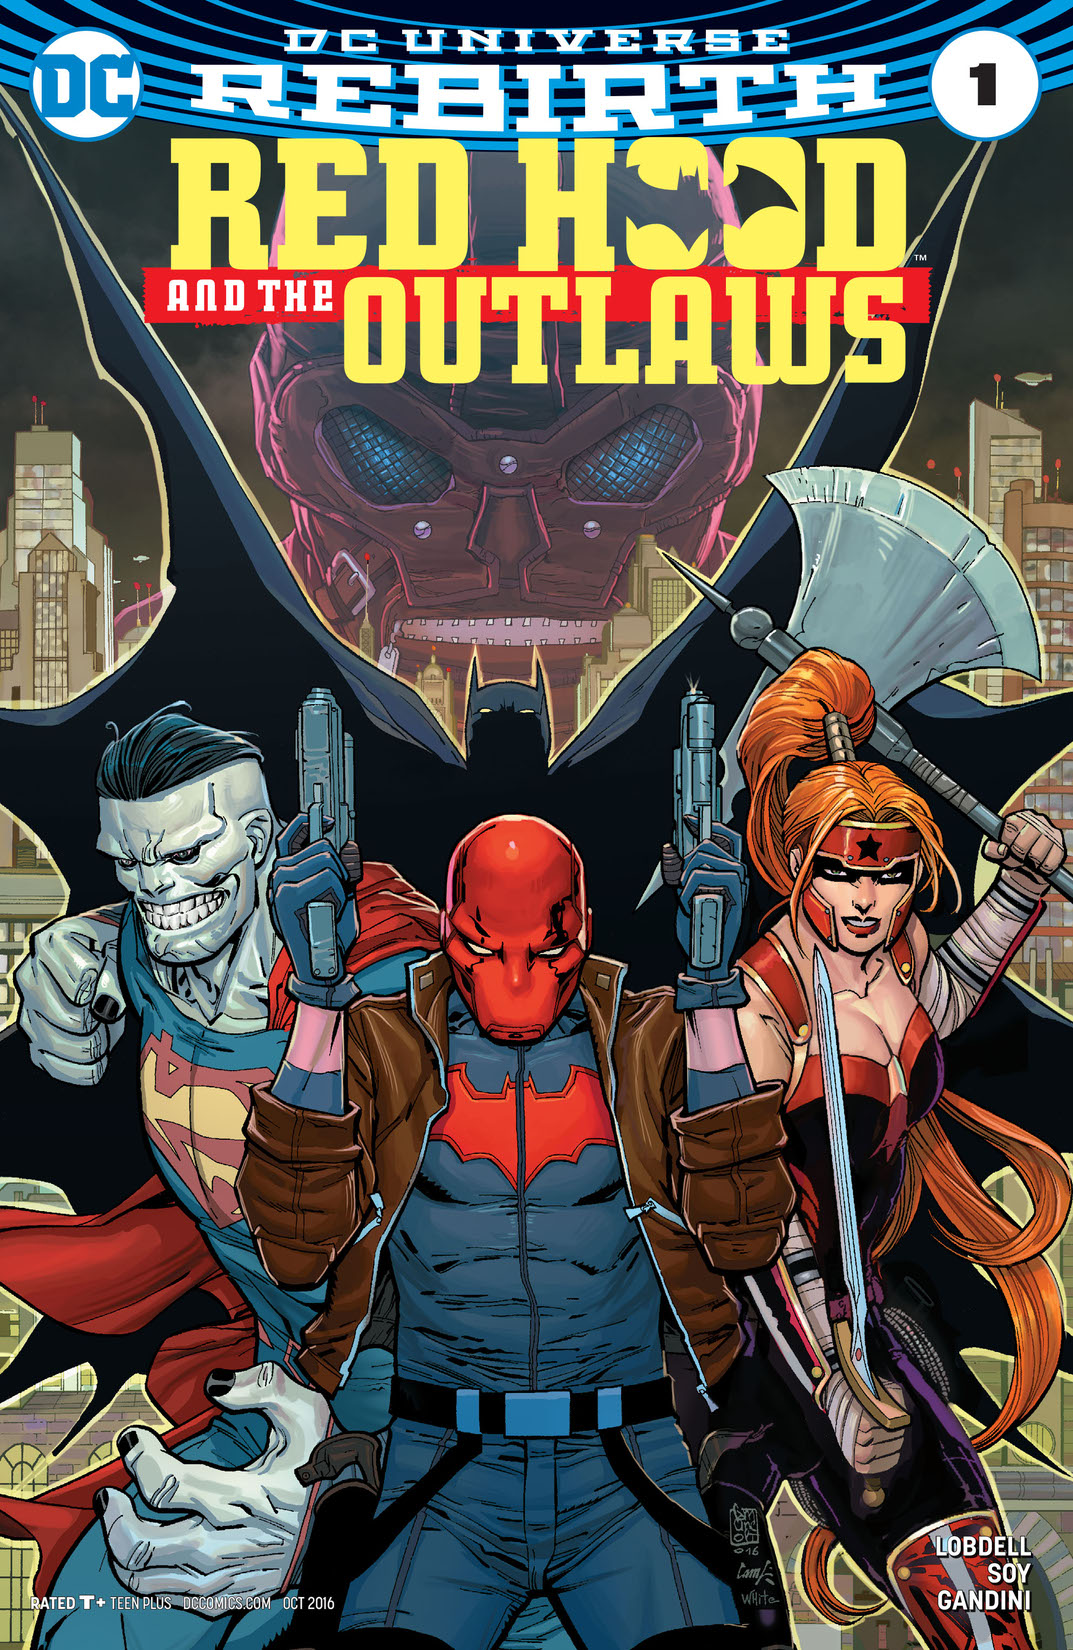 Red Hood and the Outlaws (2016-) #1 preview images